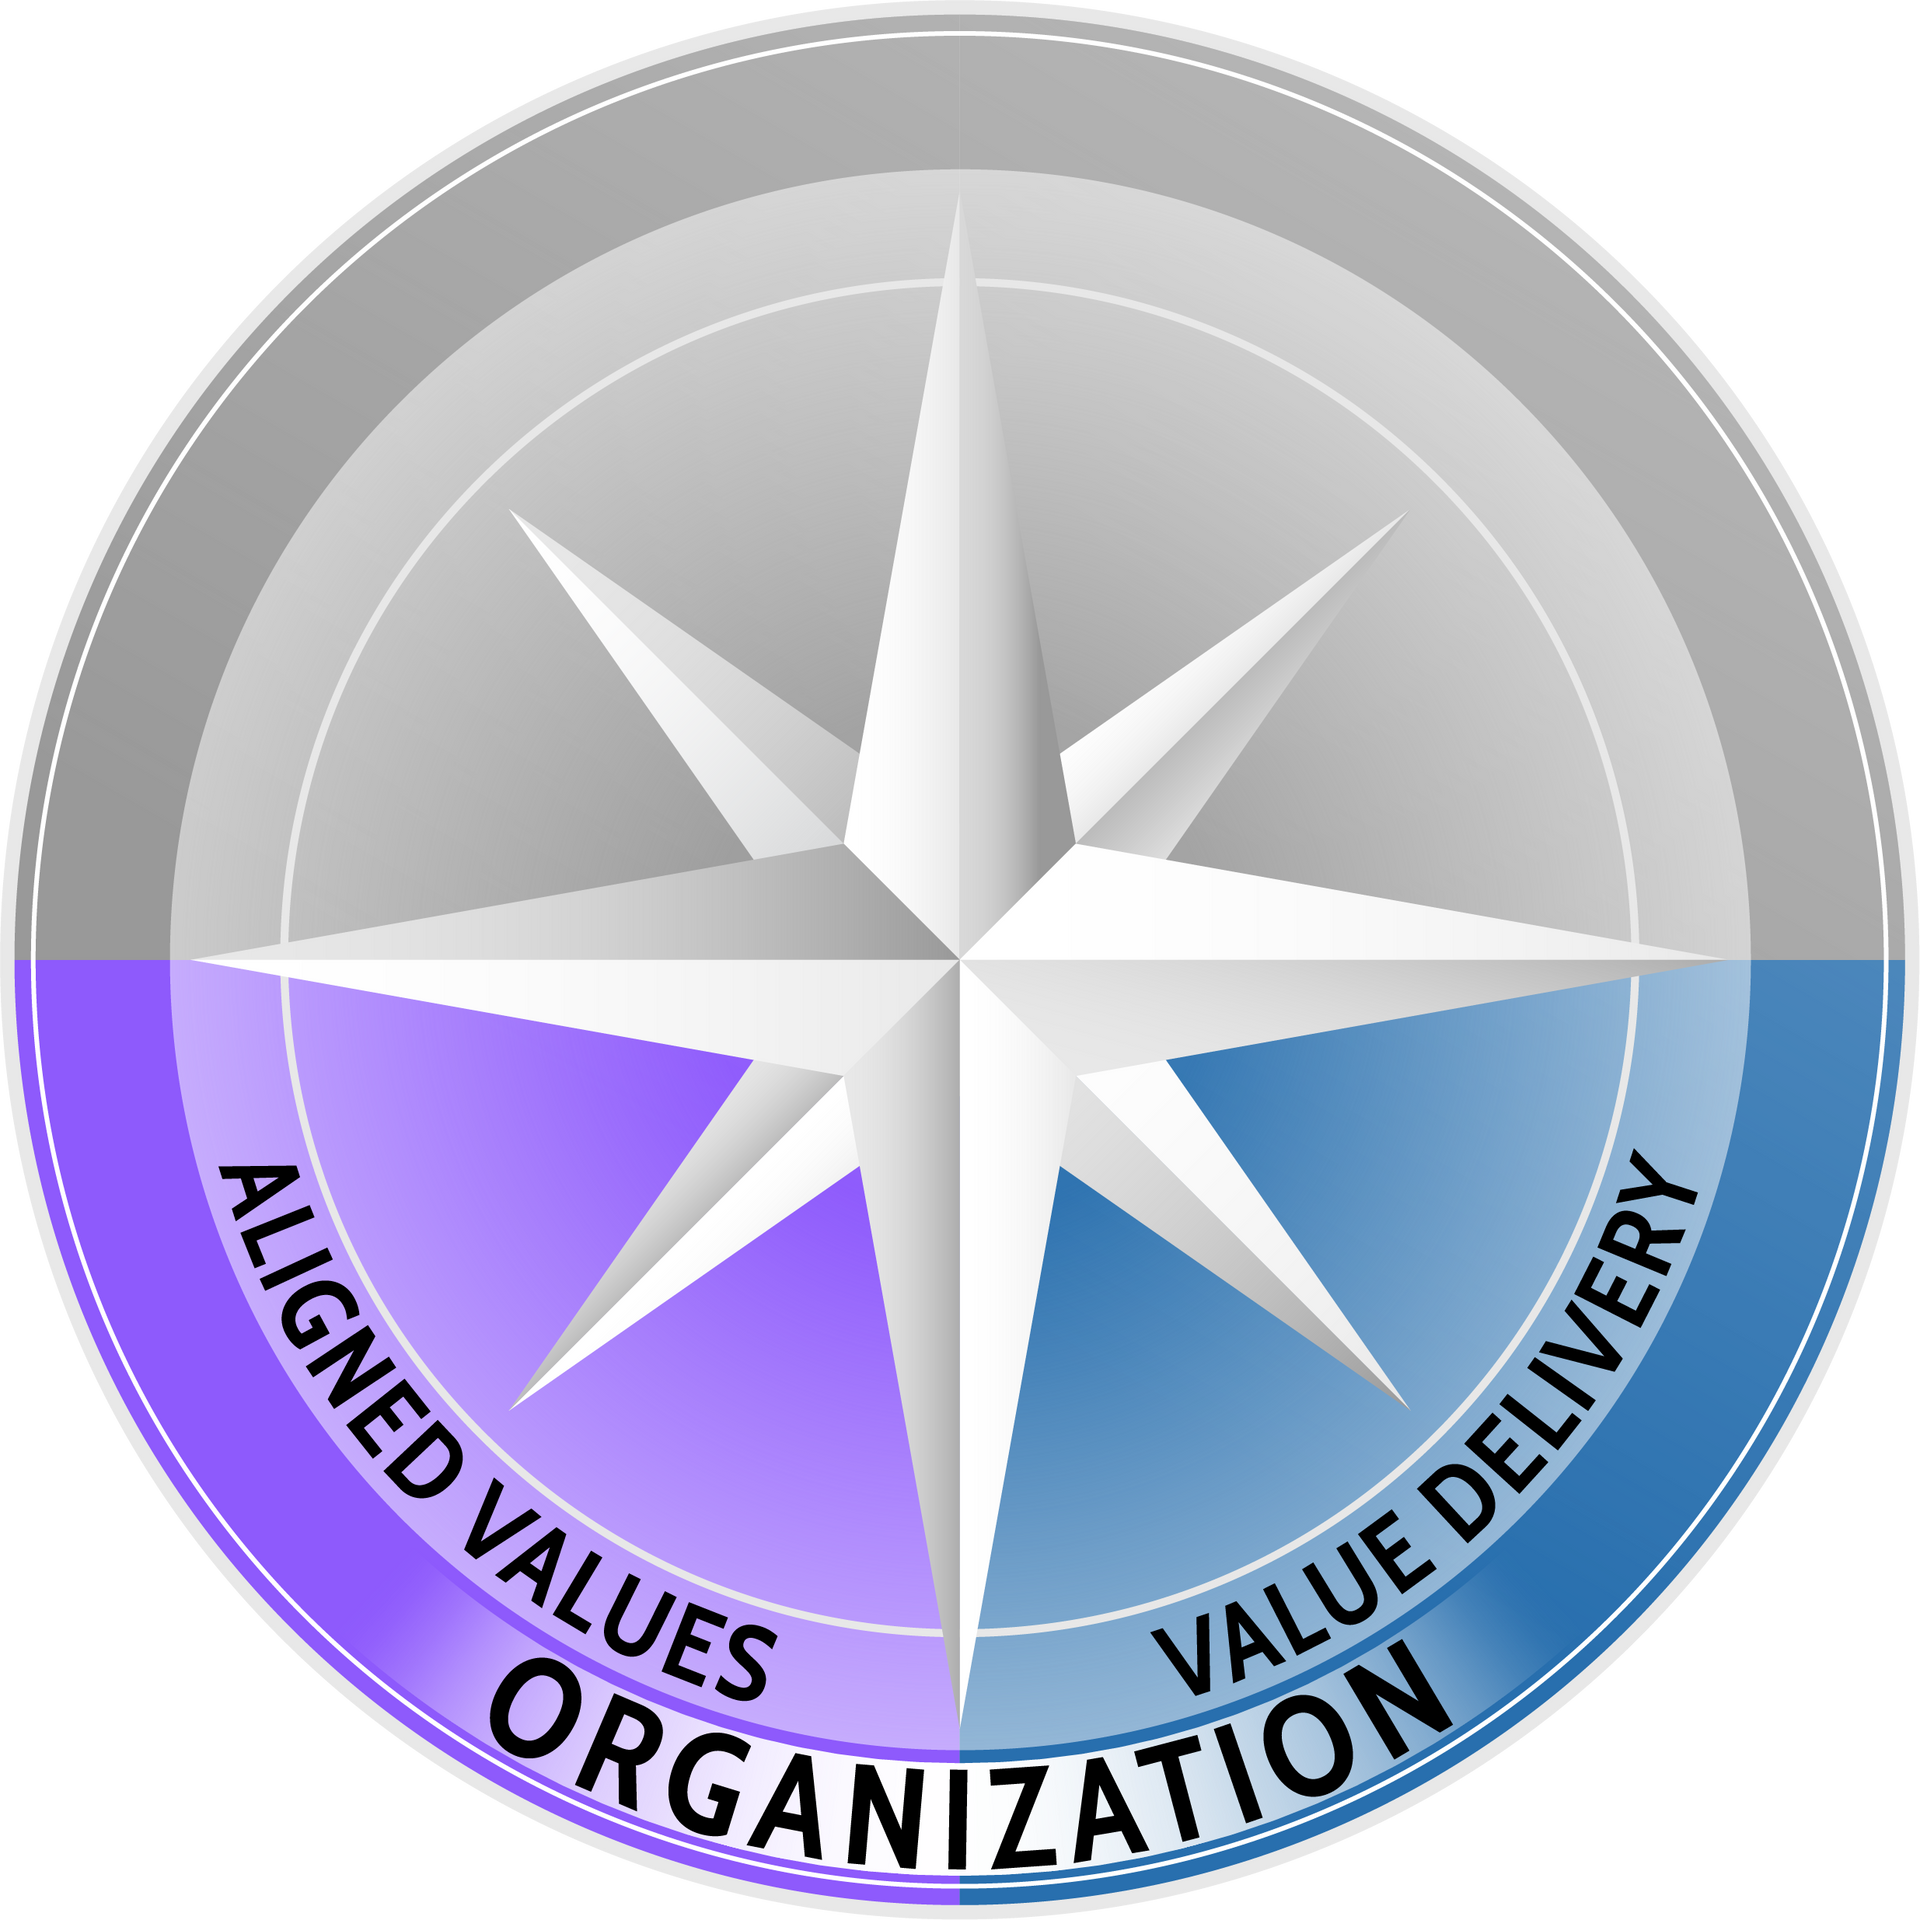 the bottom half of the leadership journey compass in color with the word organization below the words aligned values and value delivery; the top half of the compass is in grey scale without words